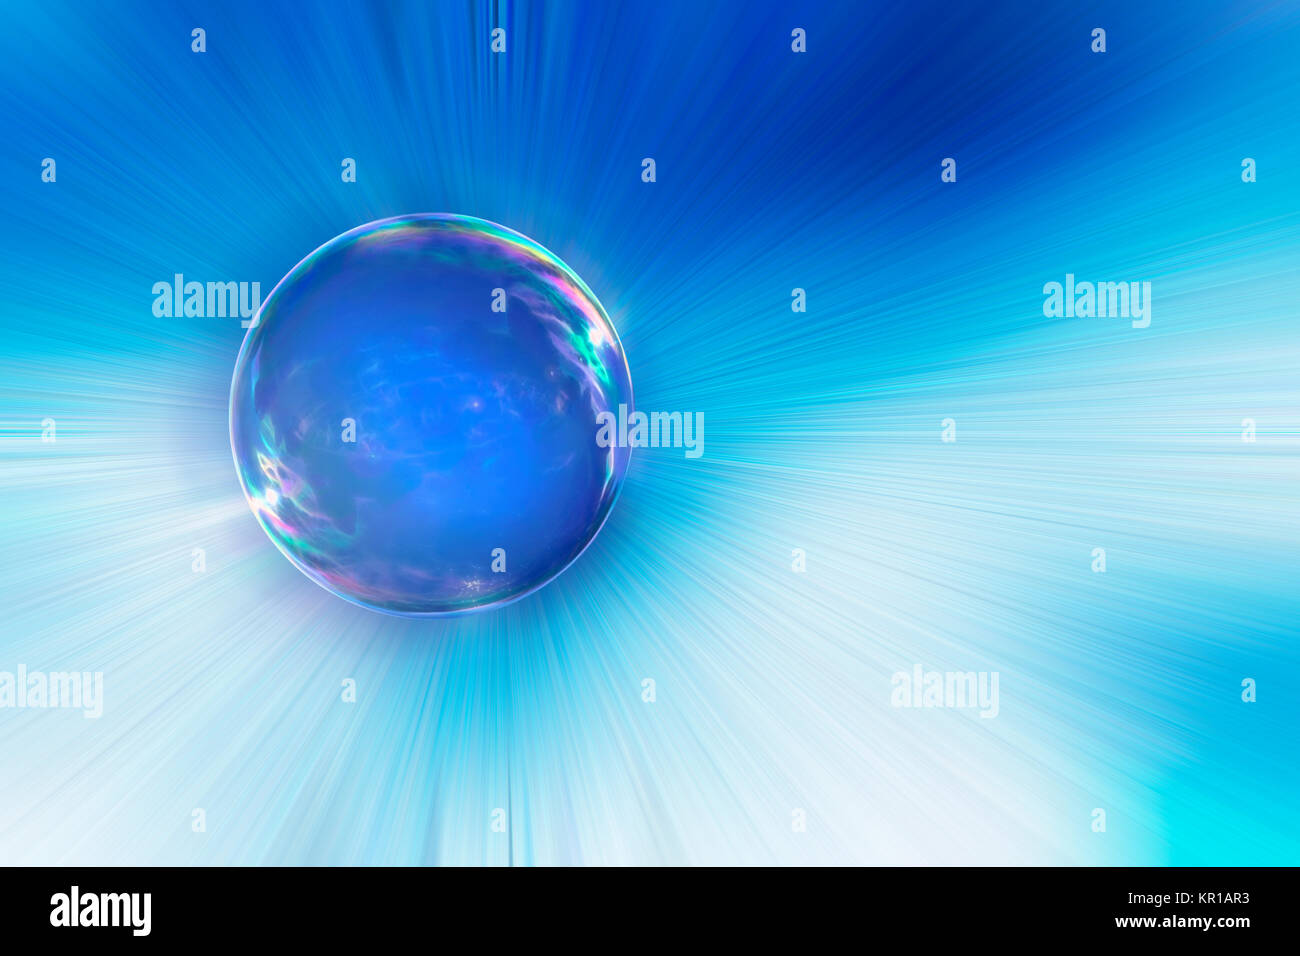 Soap bubble floating in a blue sky Stock Photo